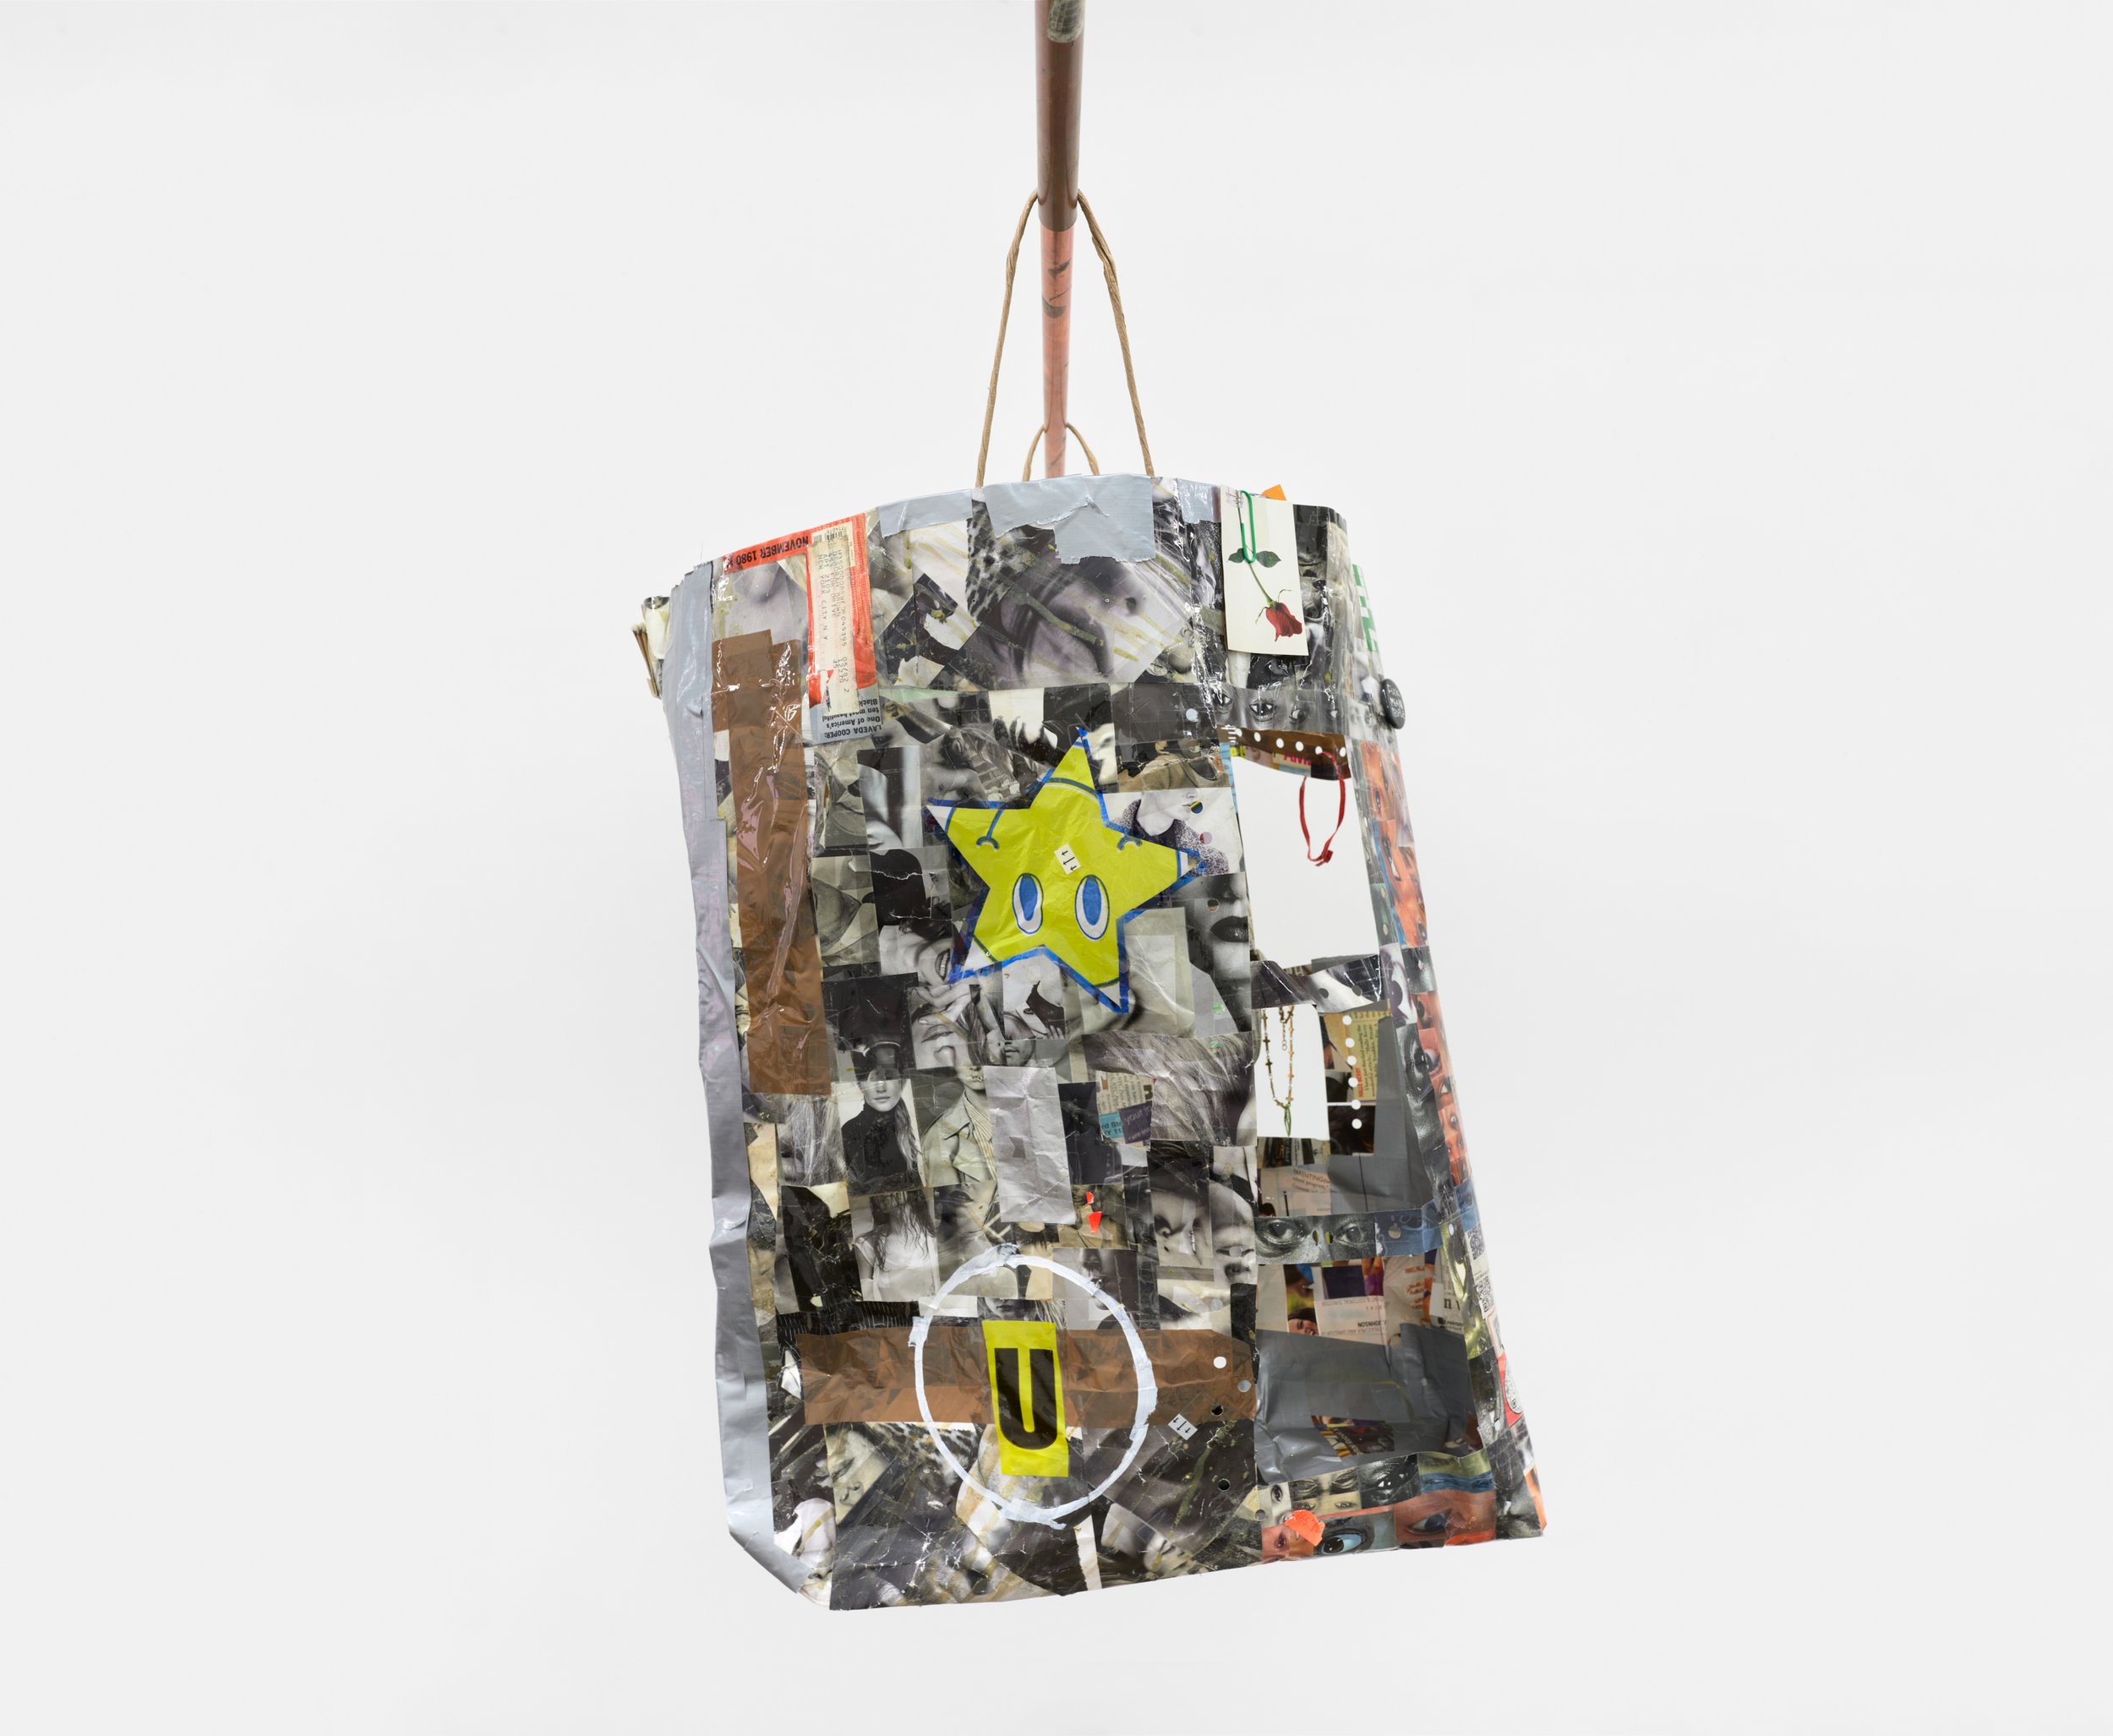  Elzie Williams III  If I Ruled The World (Time Traveler Bag) , 2023 (side 2) magazines, found qr codes, clear tape, found objects, copper  26 x 18 x 6 inches (66 x 46 x 15 cm) EW9 